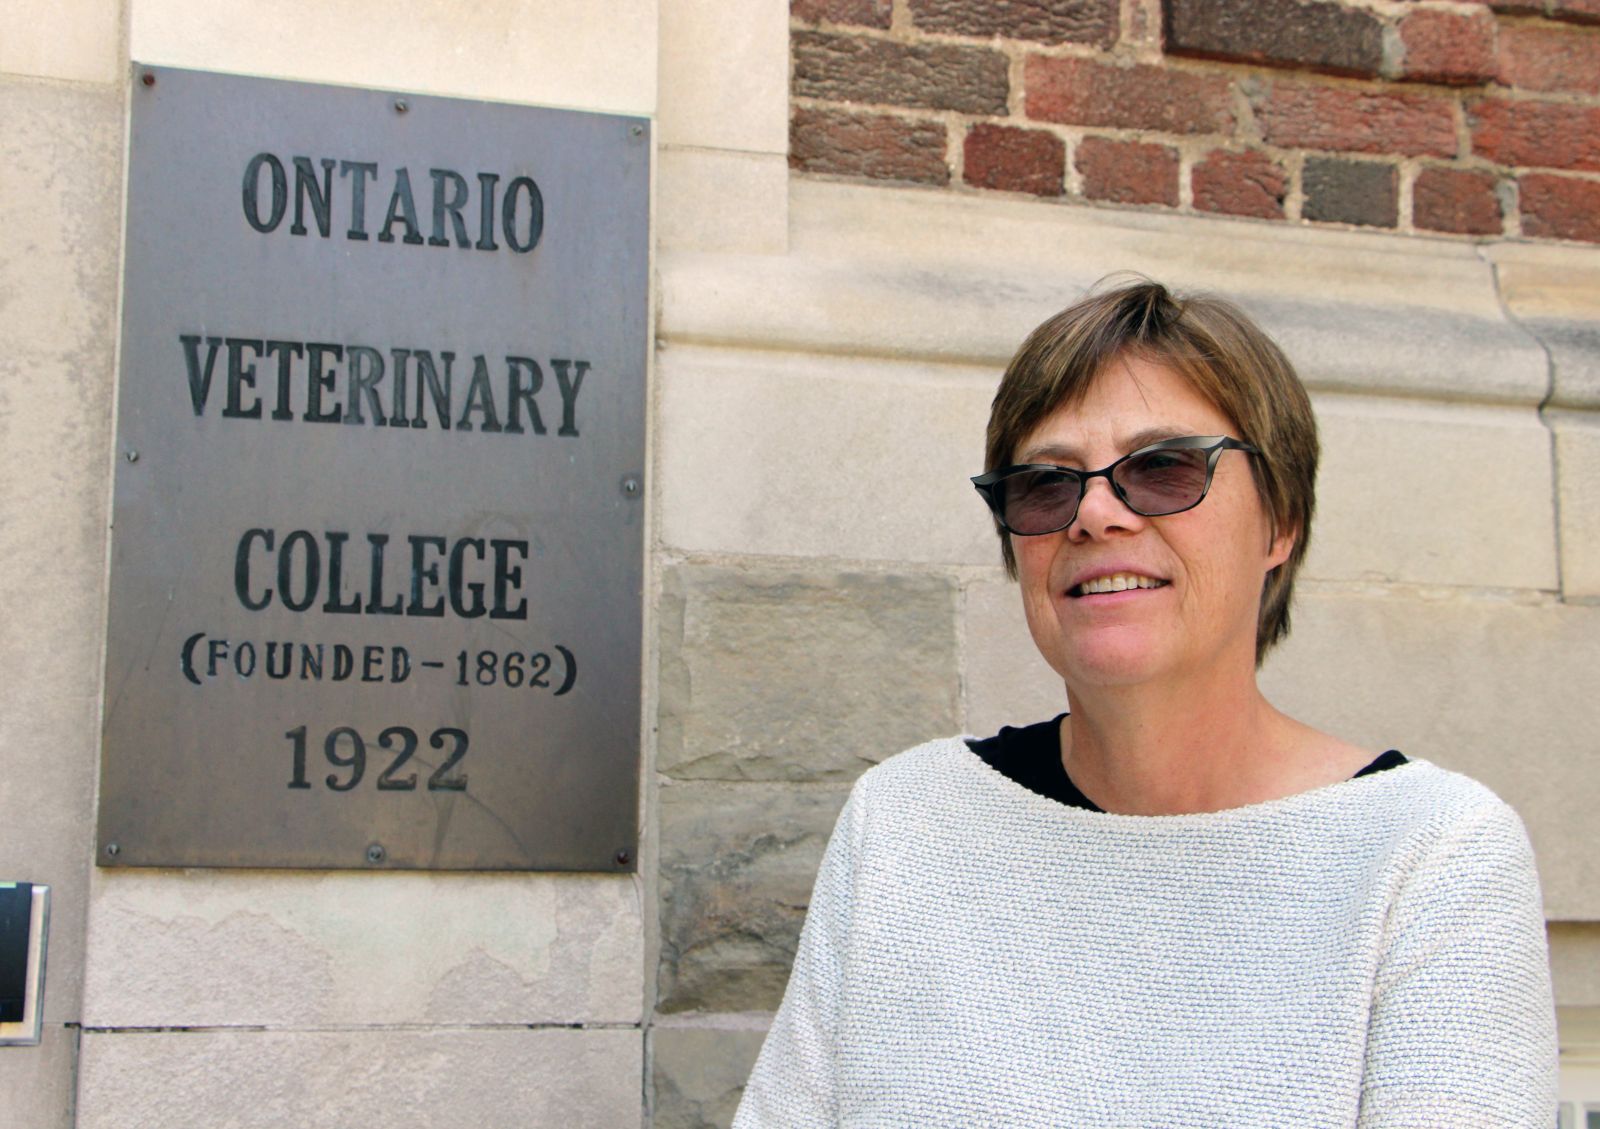 Dr. Jan Sargeant, Ontario Veterinary College, University of Guelph